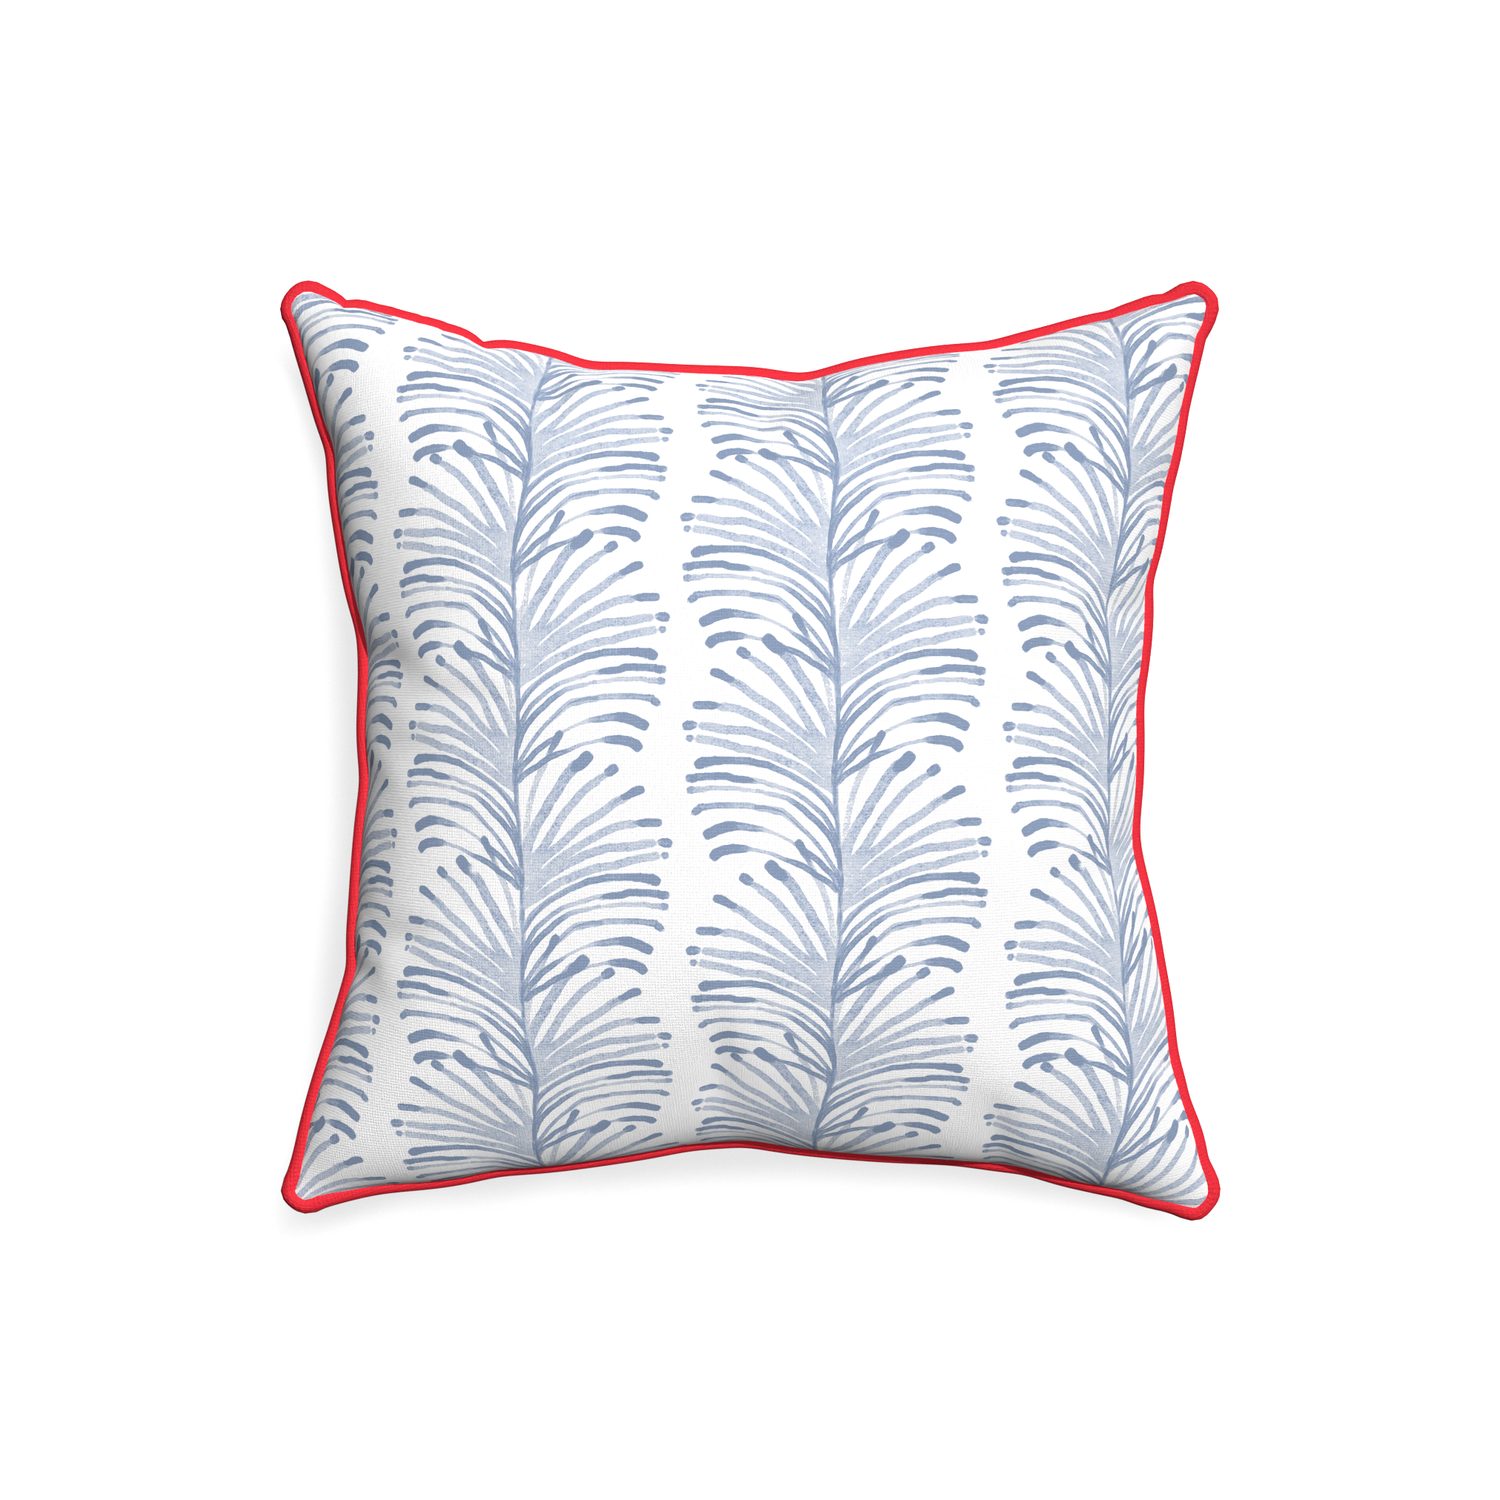 20-square emma sky custom pillow with cherry piping on white background